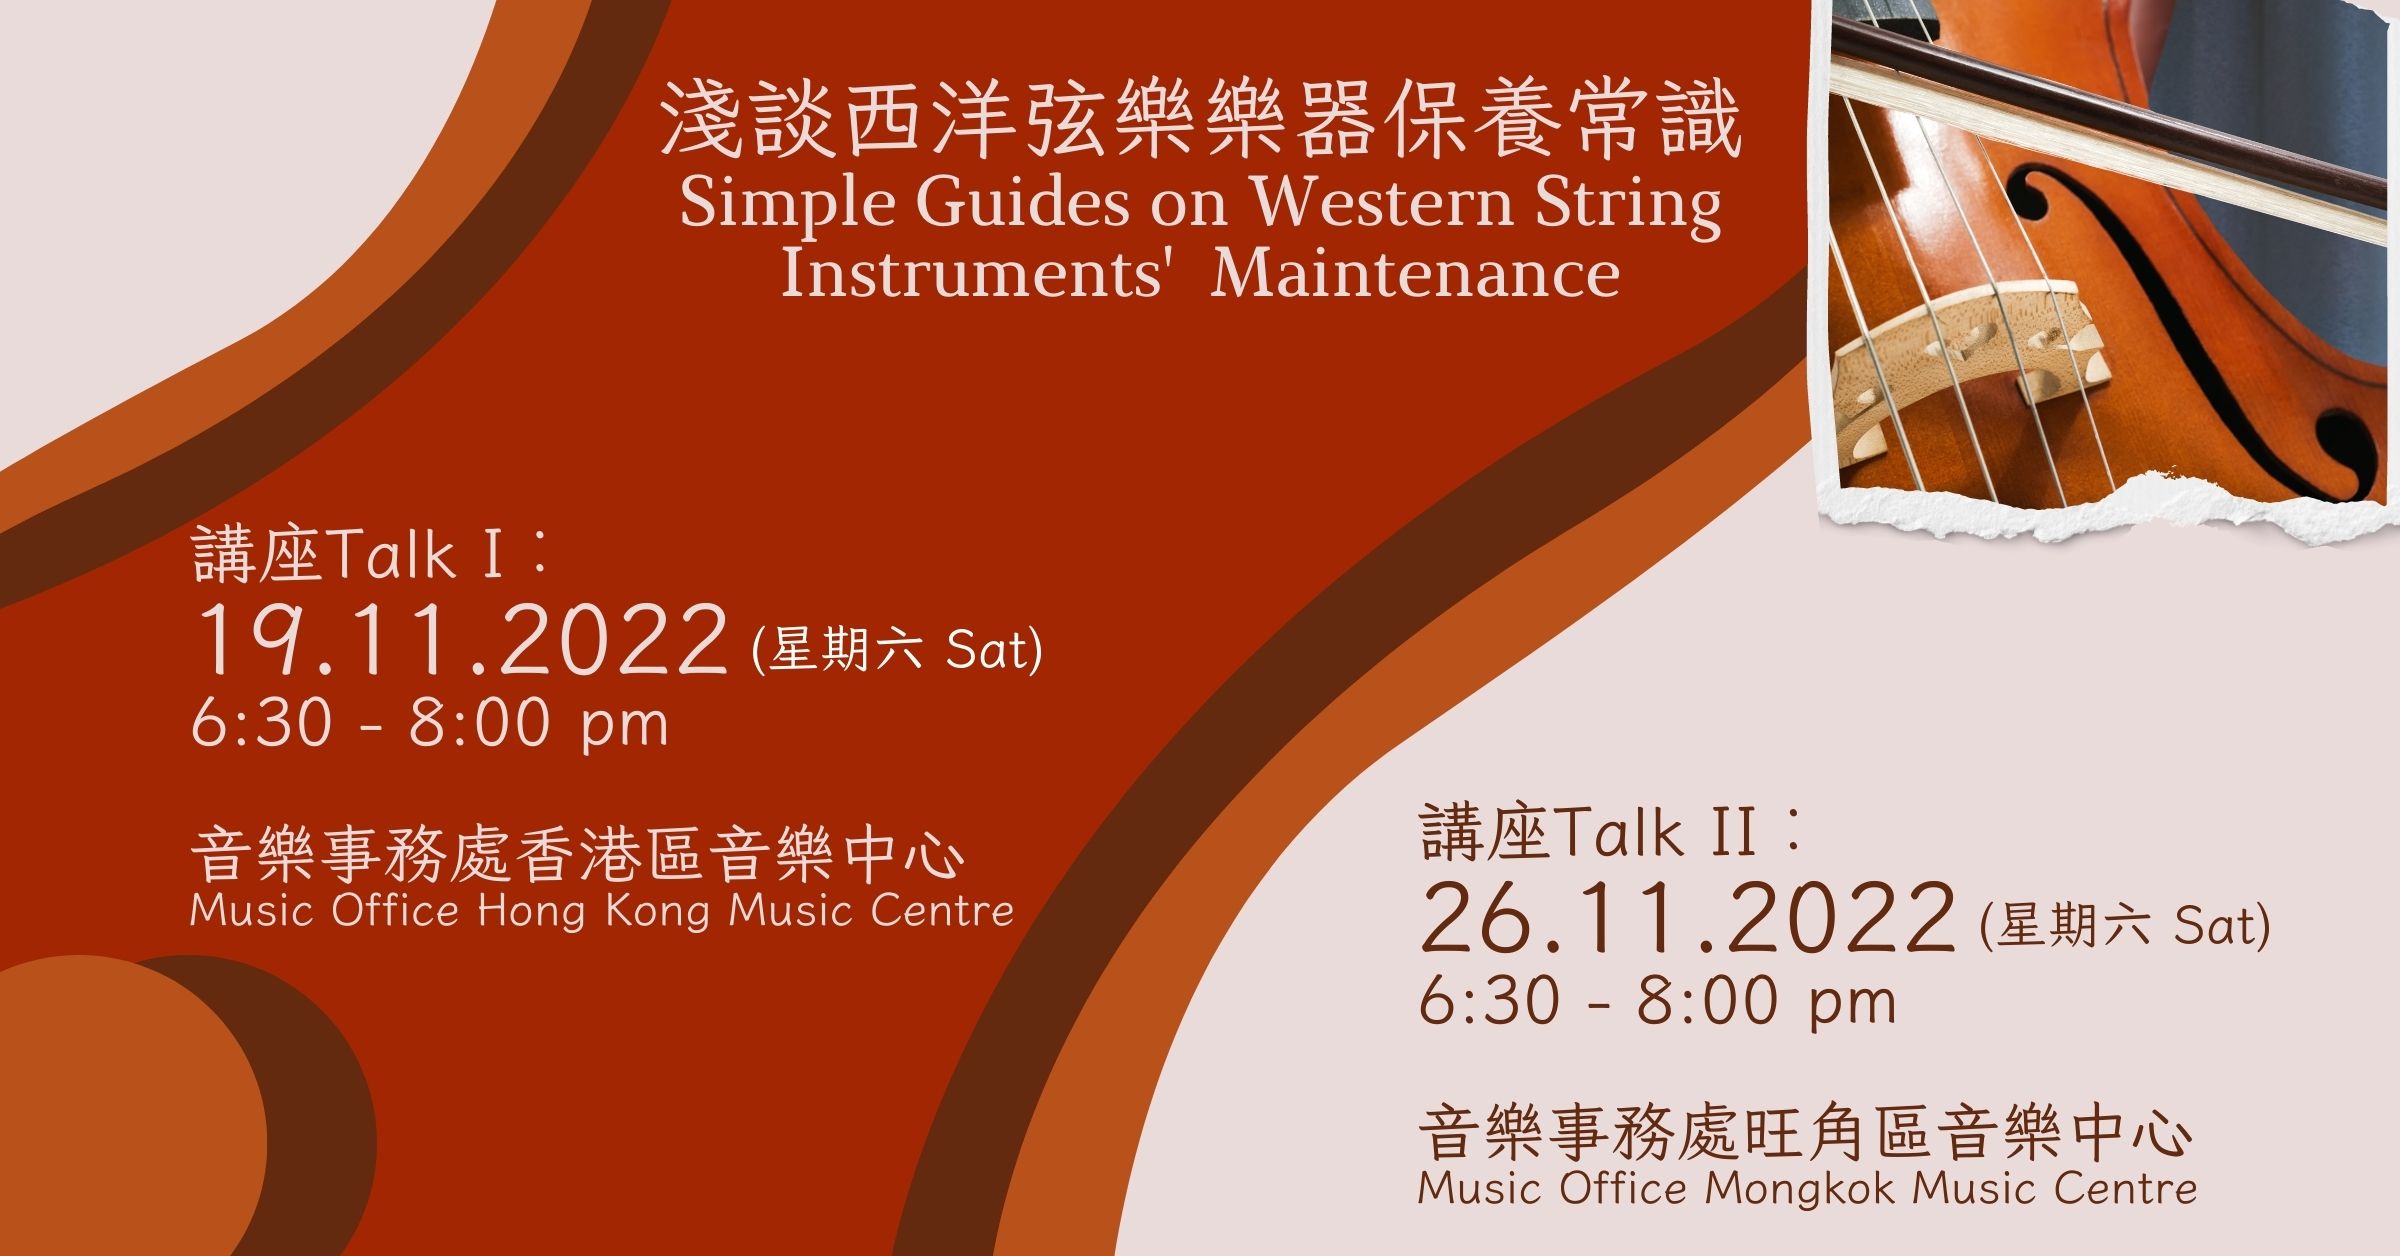 2022 Simple Guides on Western String Instruments' Maintenance (Completed)